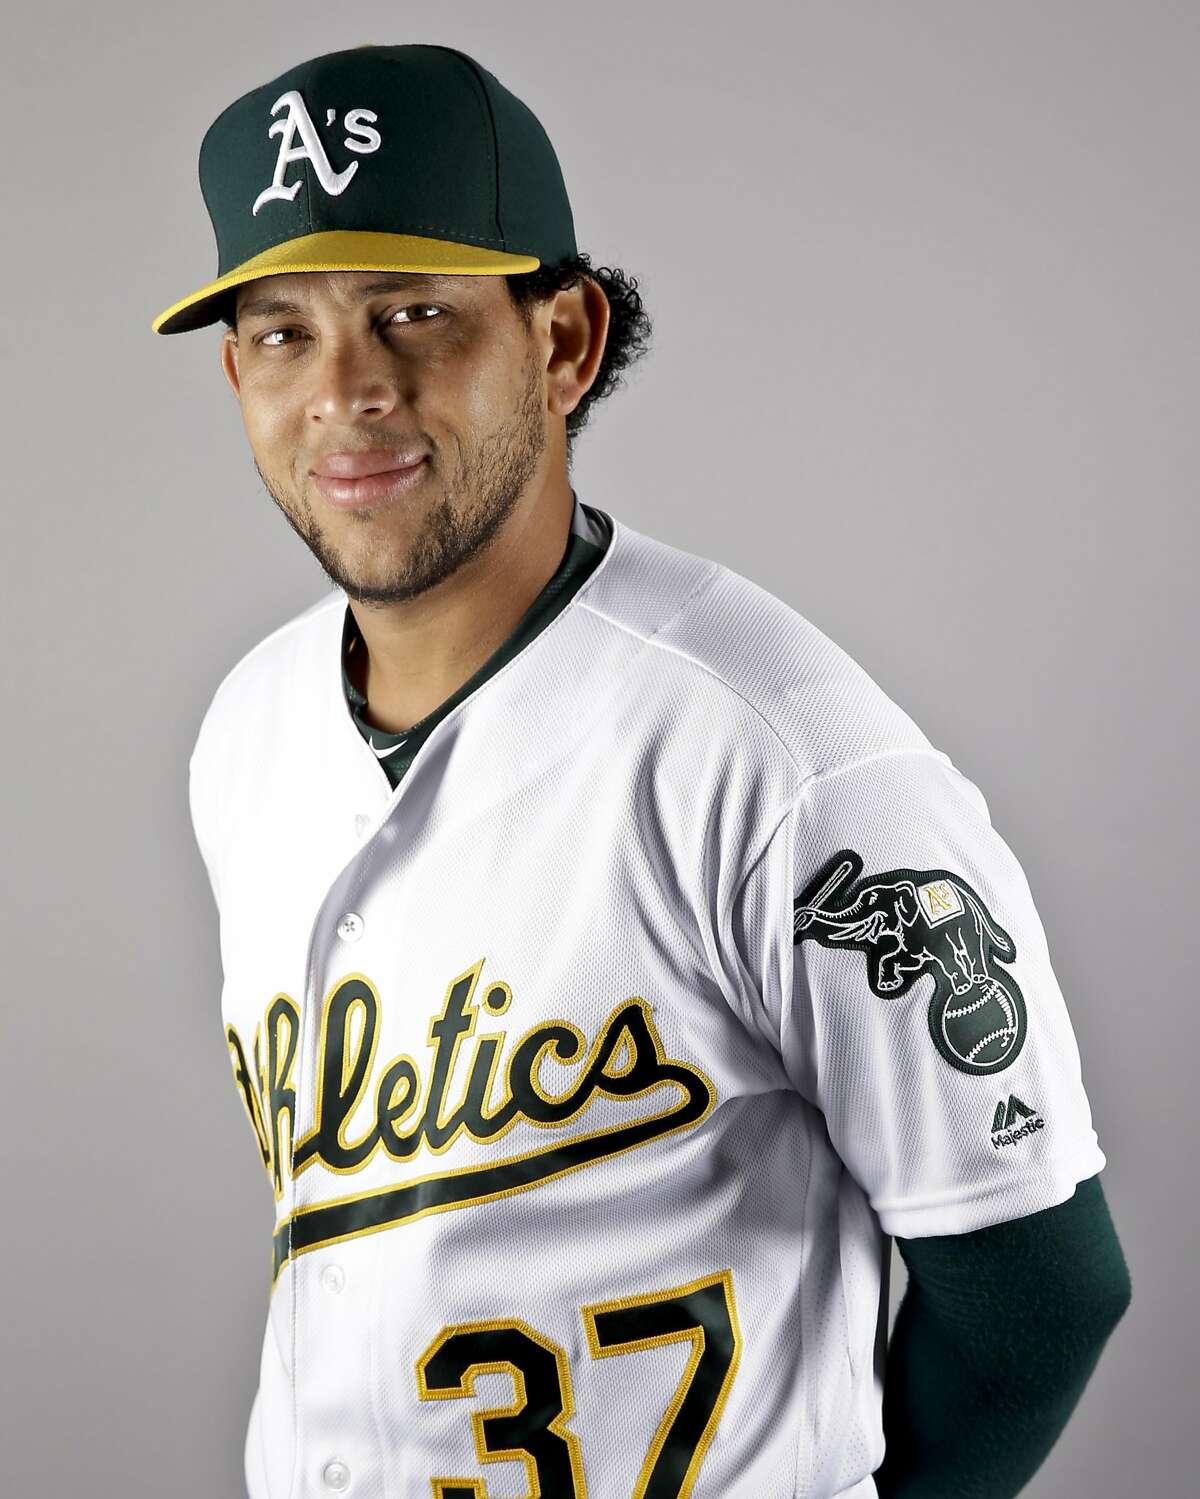 This is a 2016 photo of Henderson Alvarez of the Oakland Athletics baseball team. This image reflects the Oakland Athletics active roster as of Monday, Feb. 29, 2016, when this image was taken. (AP Photo/Chris Carlson)